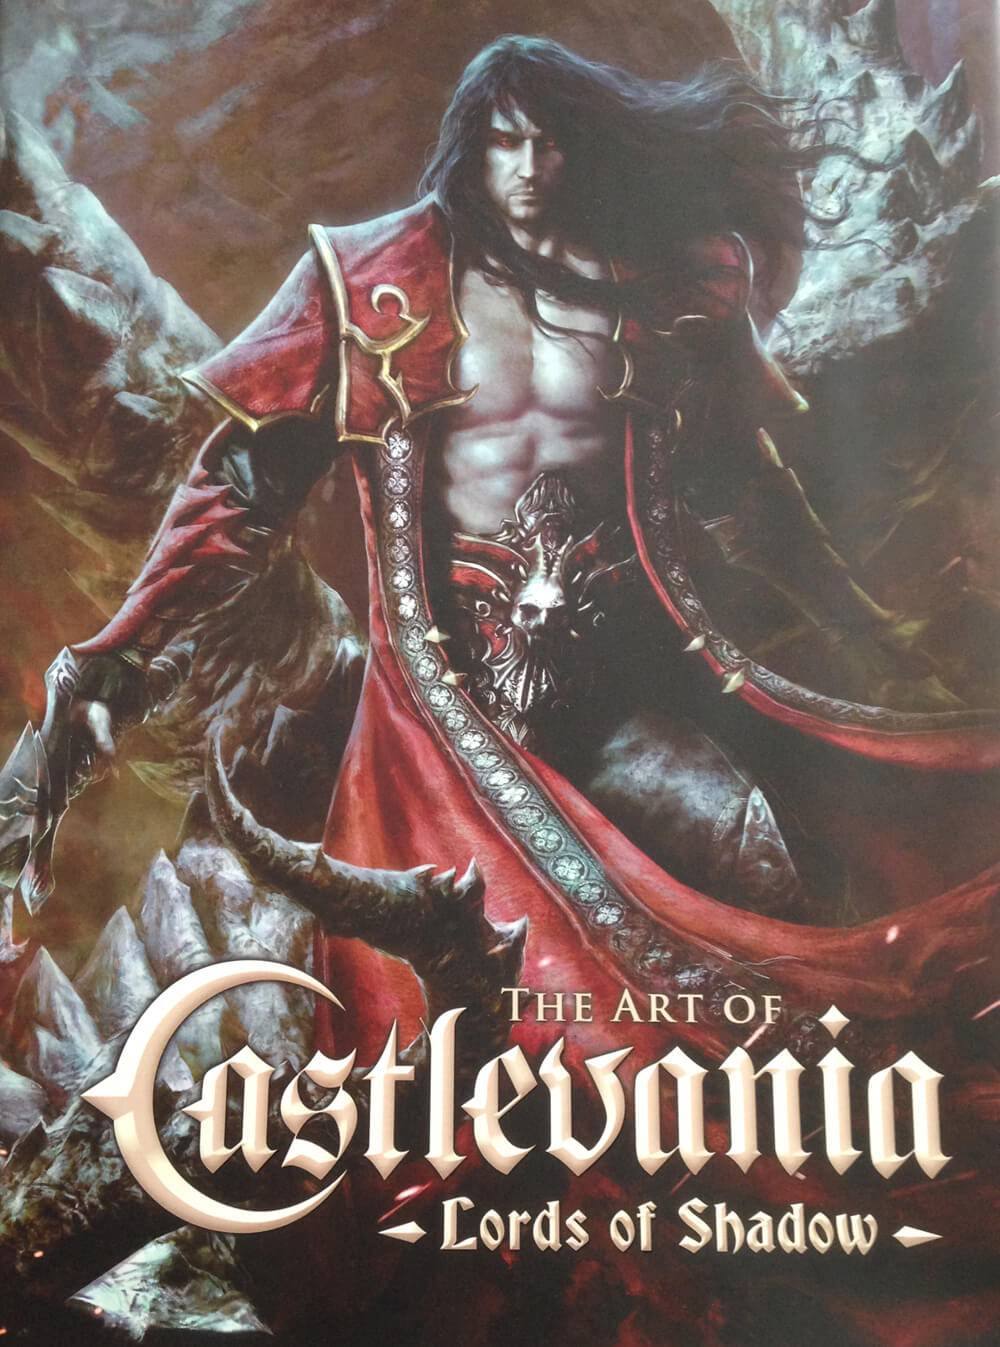 castlevania lords of shadow book